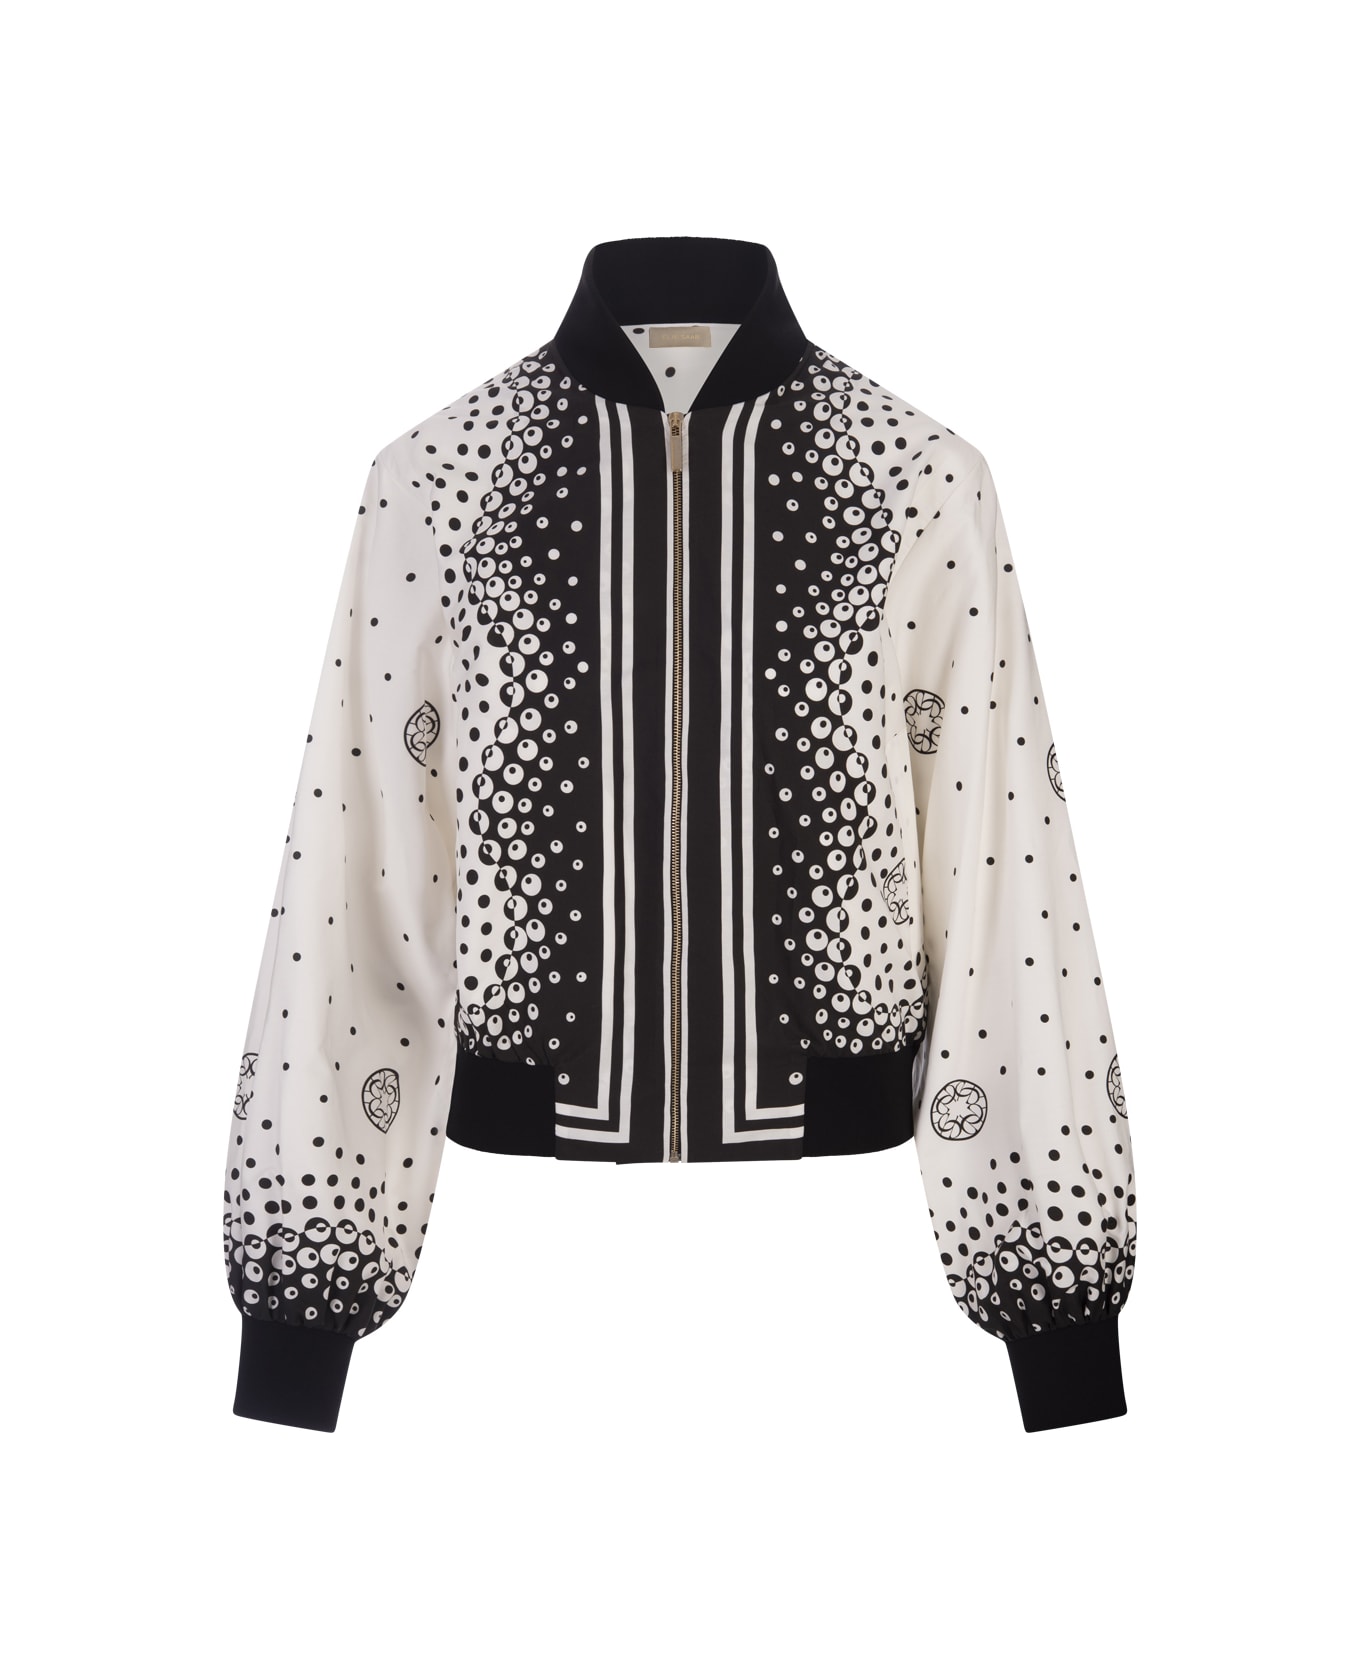 Elie Saab Moon Printed Cotton Bomber Jacket In White And Black - White ダウンジャケット